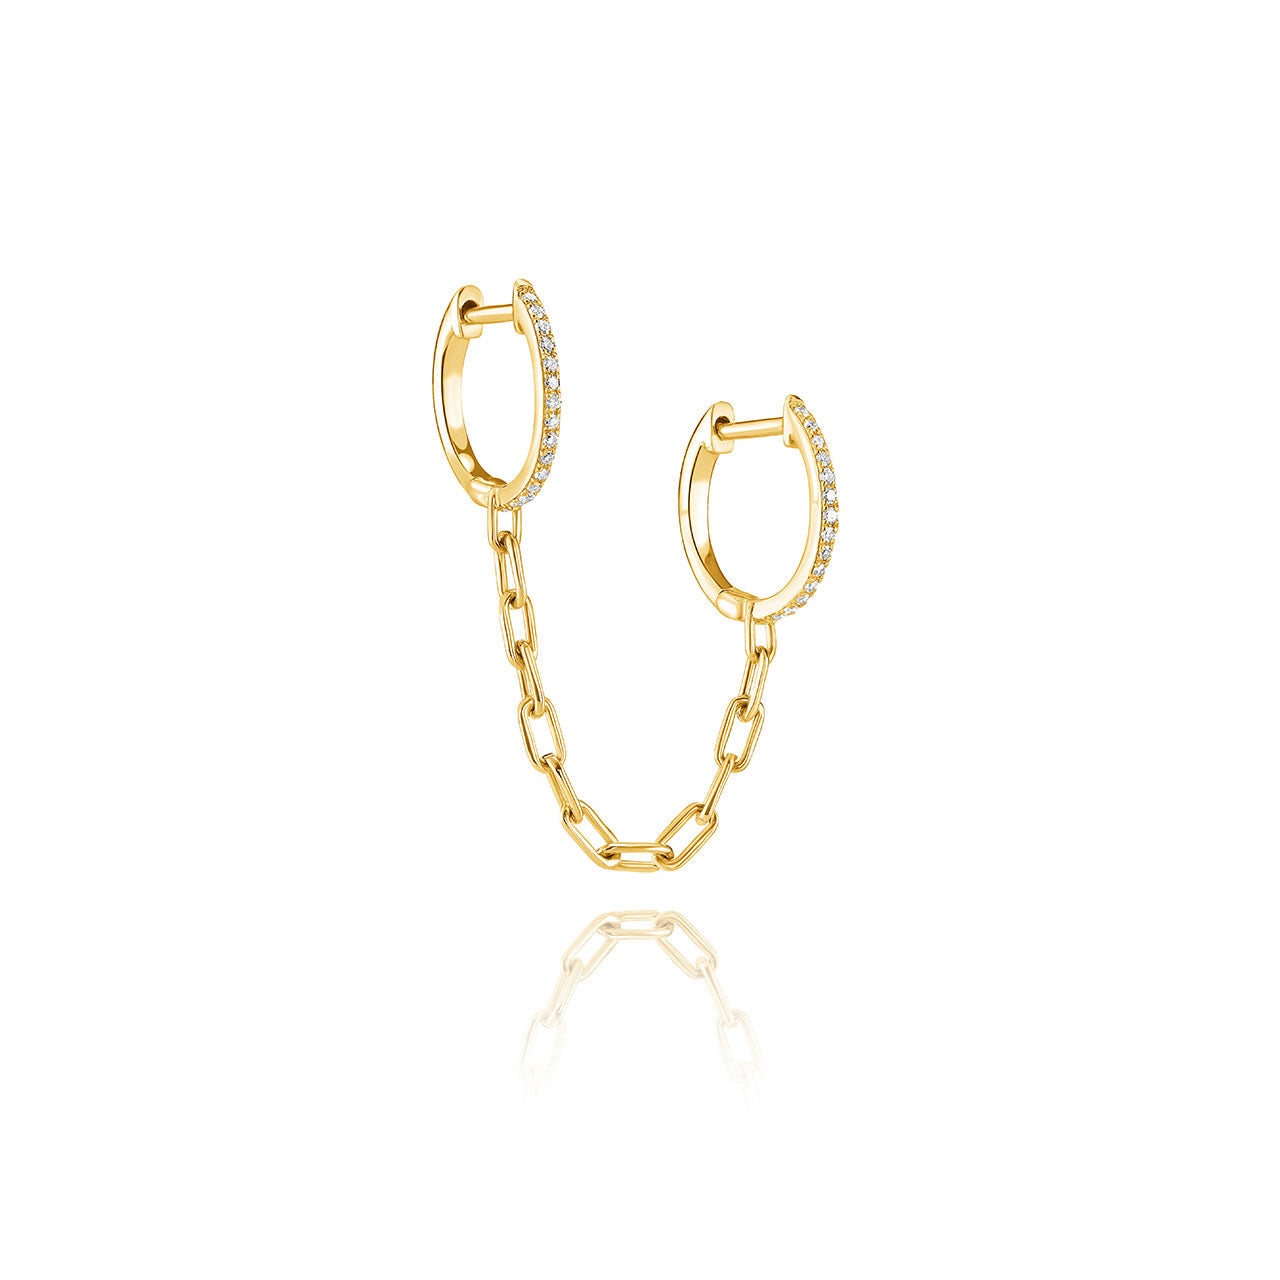 Single Earring Hoops Connected by Chain